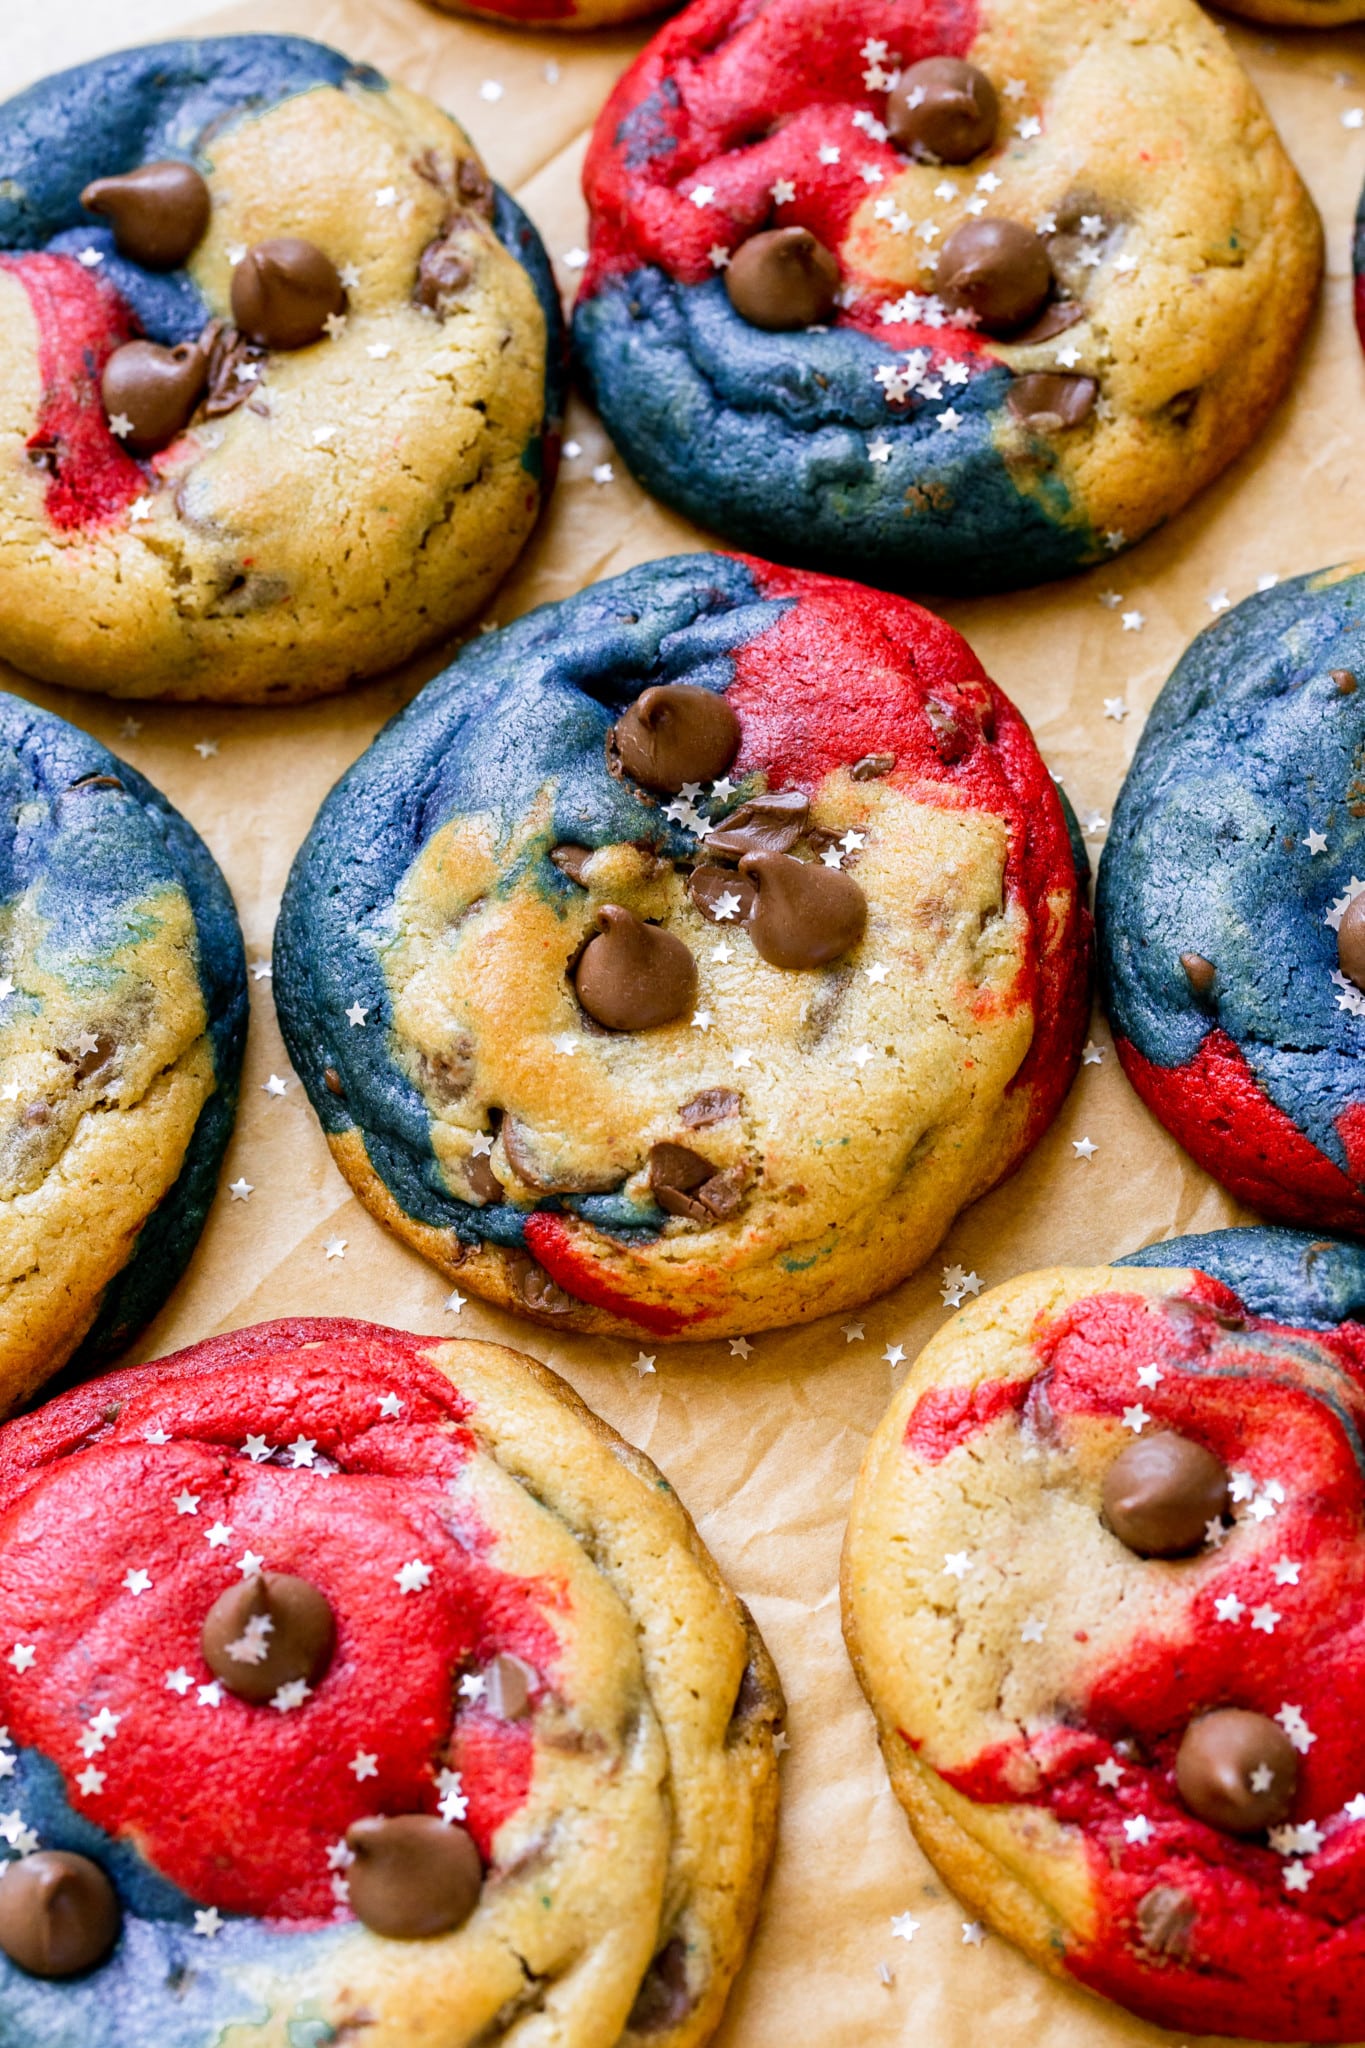 a festive cookie made with red and blue food coloring decorated with silver glitter stars. 